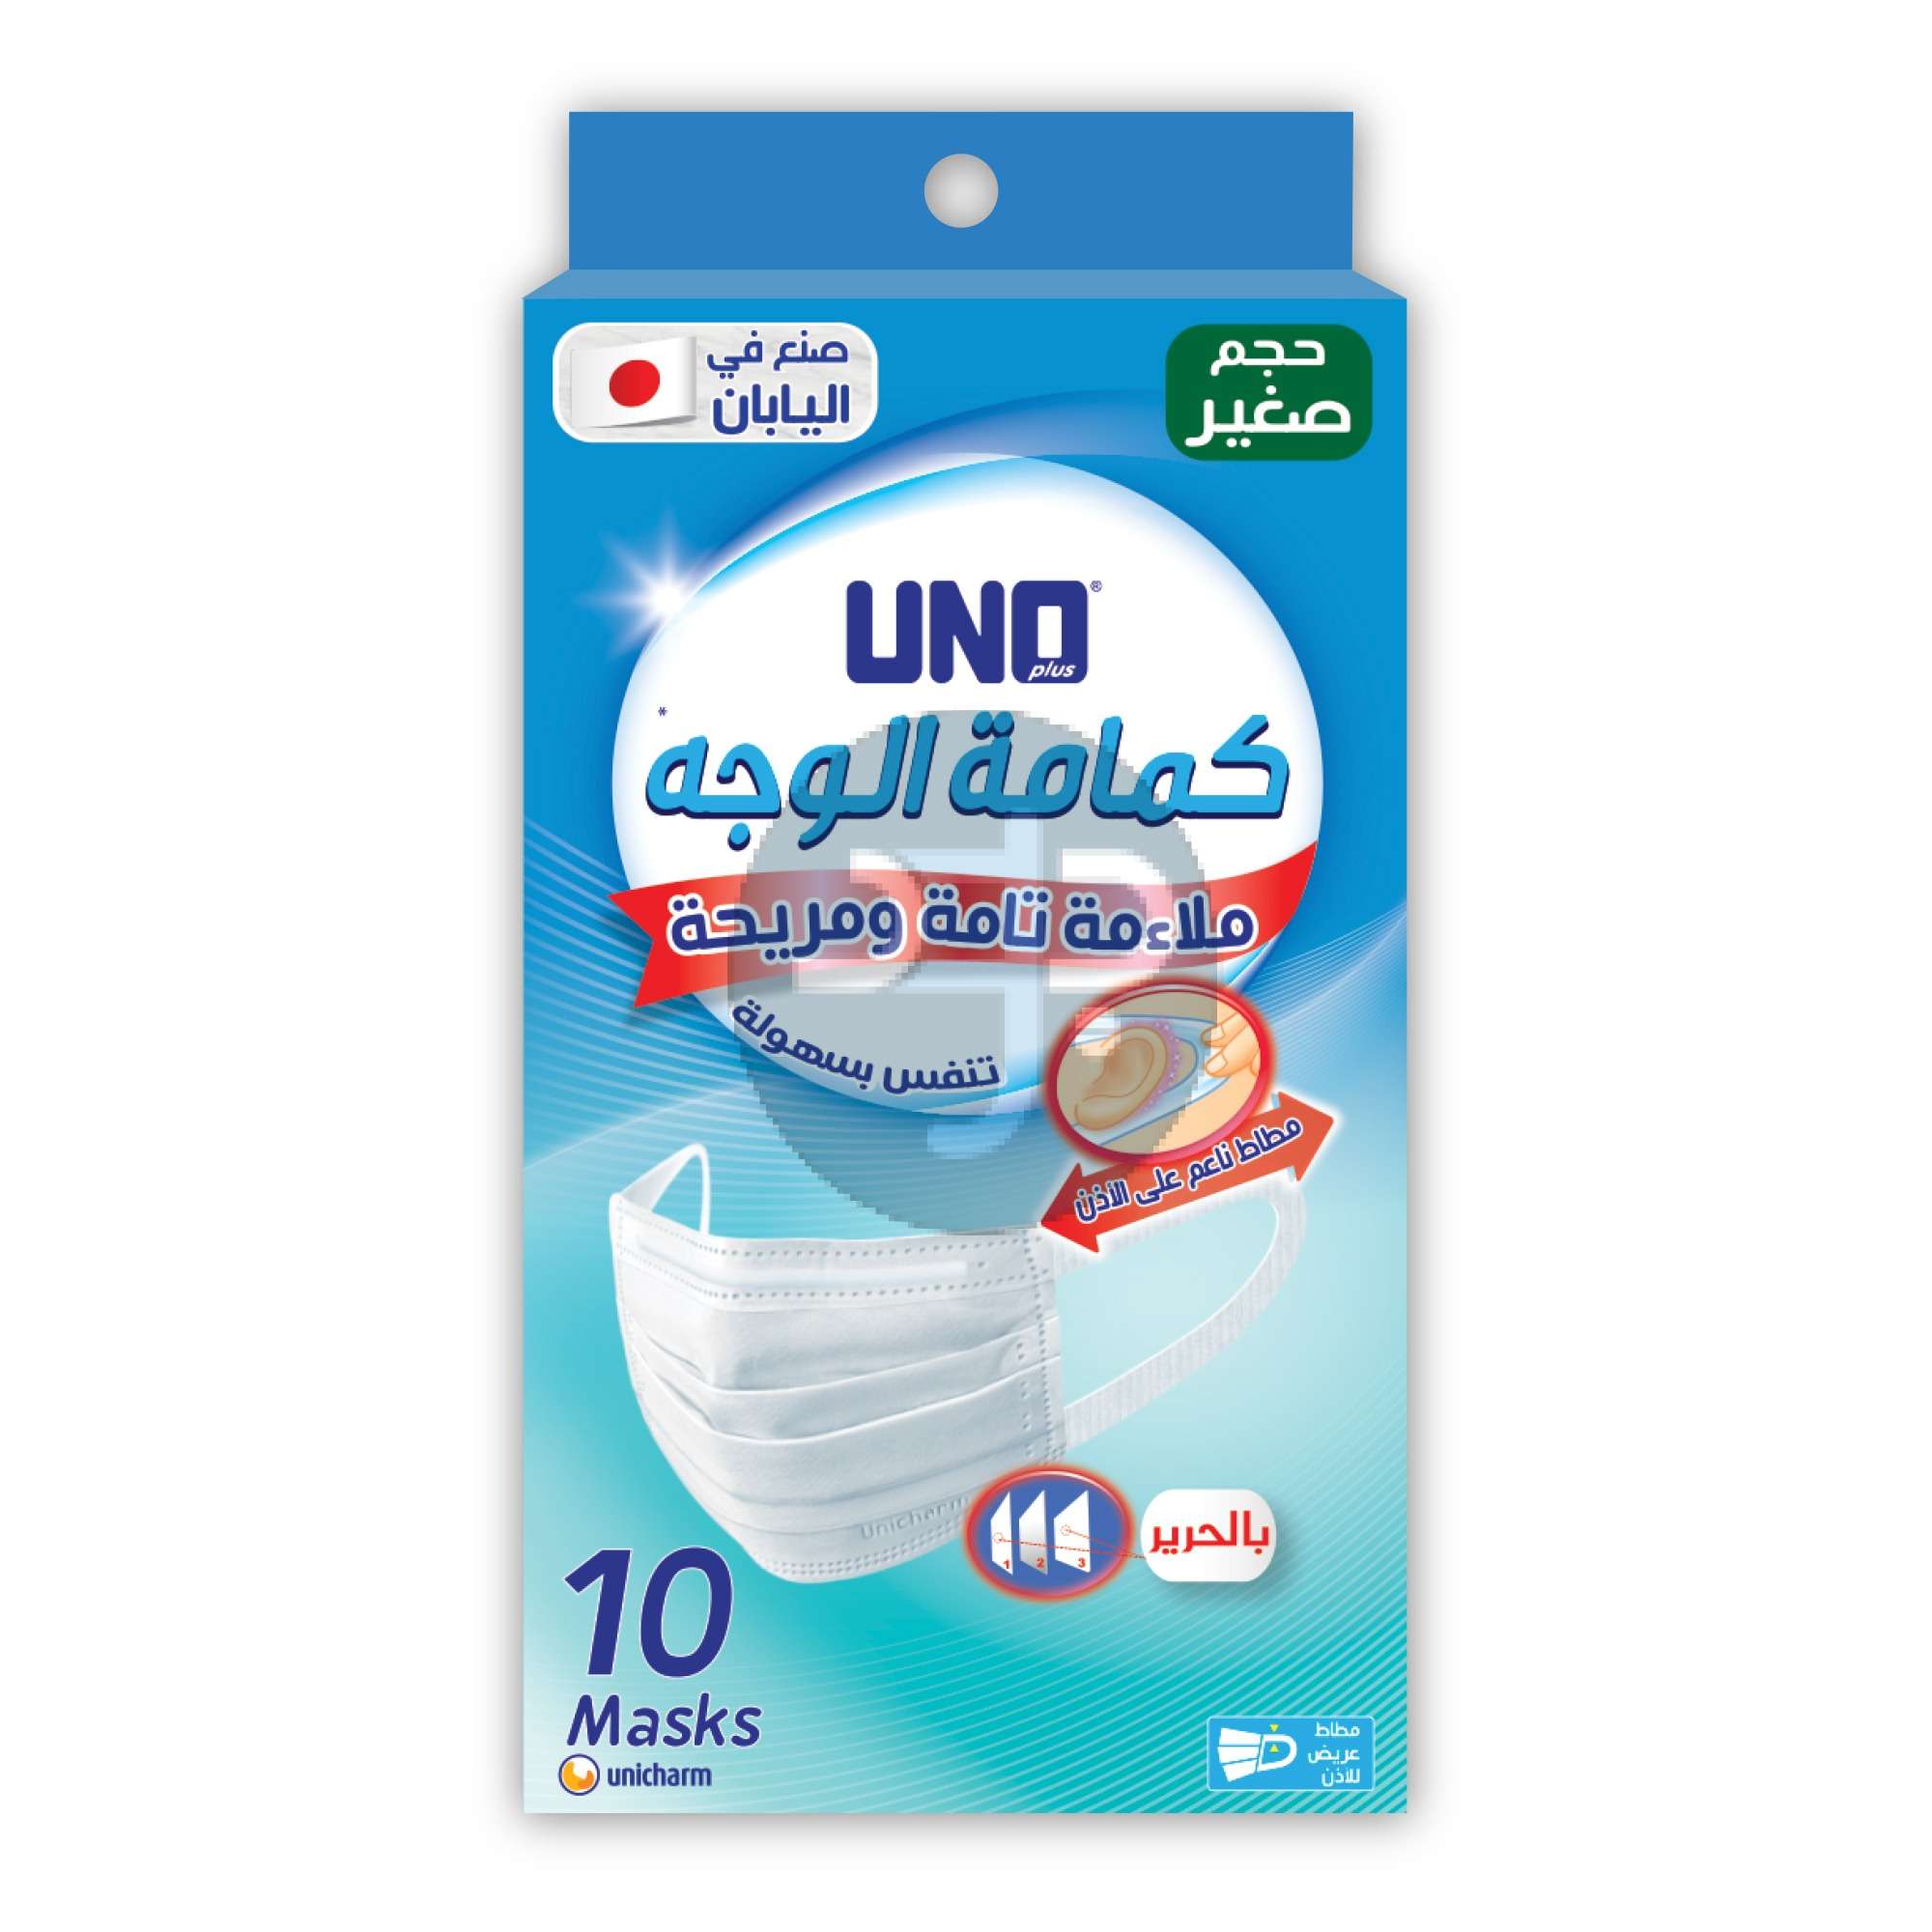 Product-UNO Plus Face Mask, Small Size , Pack of 10 Masks